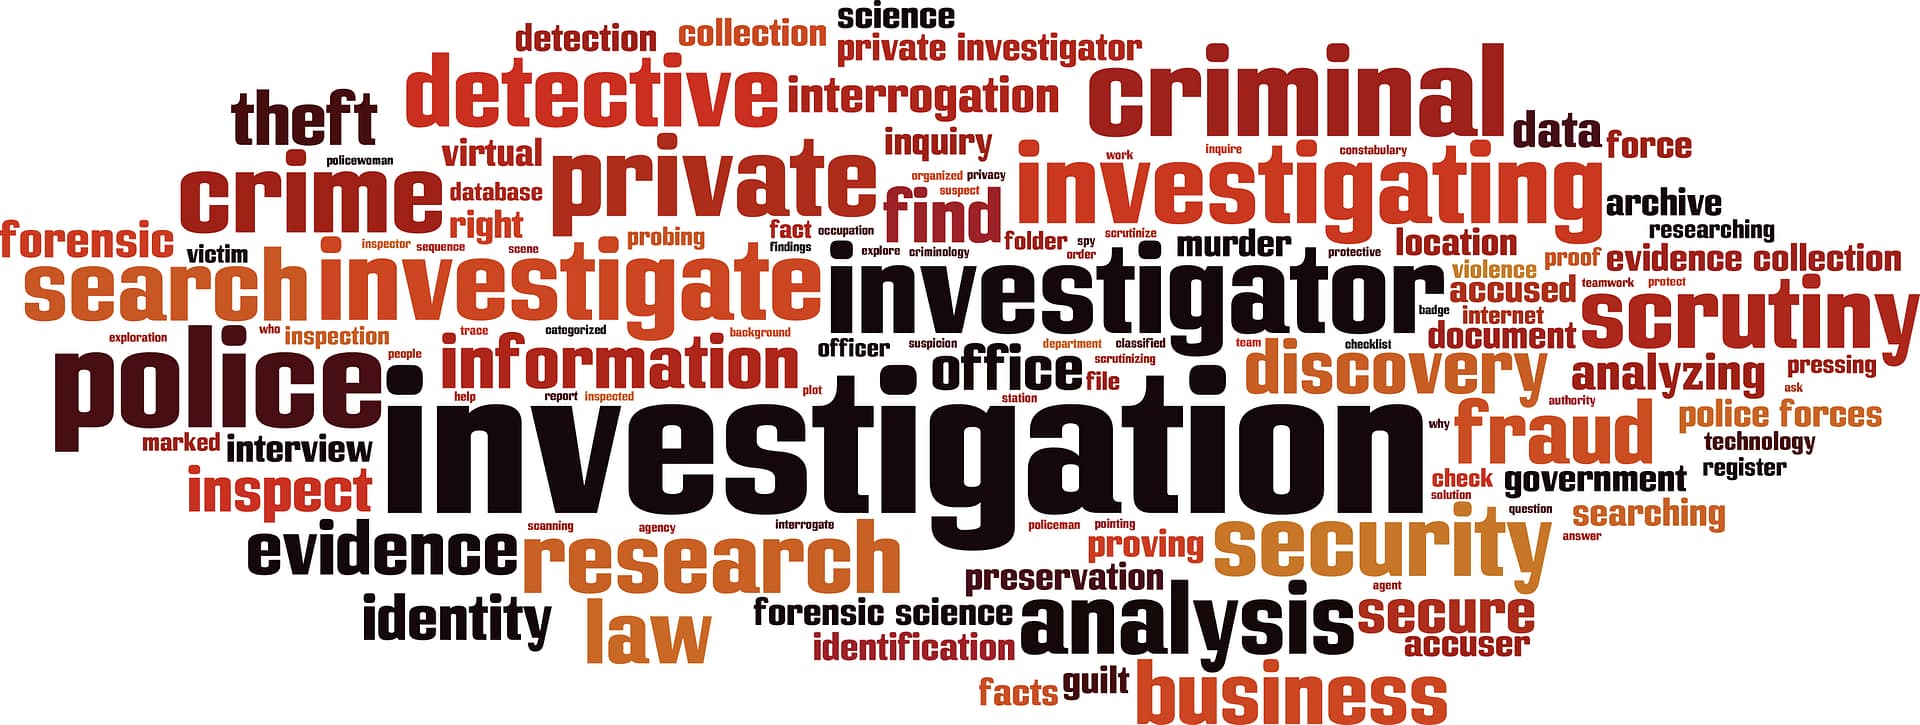 The Herrin Group Investigations